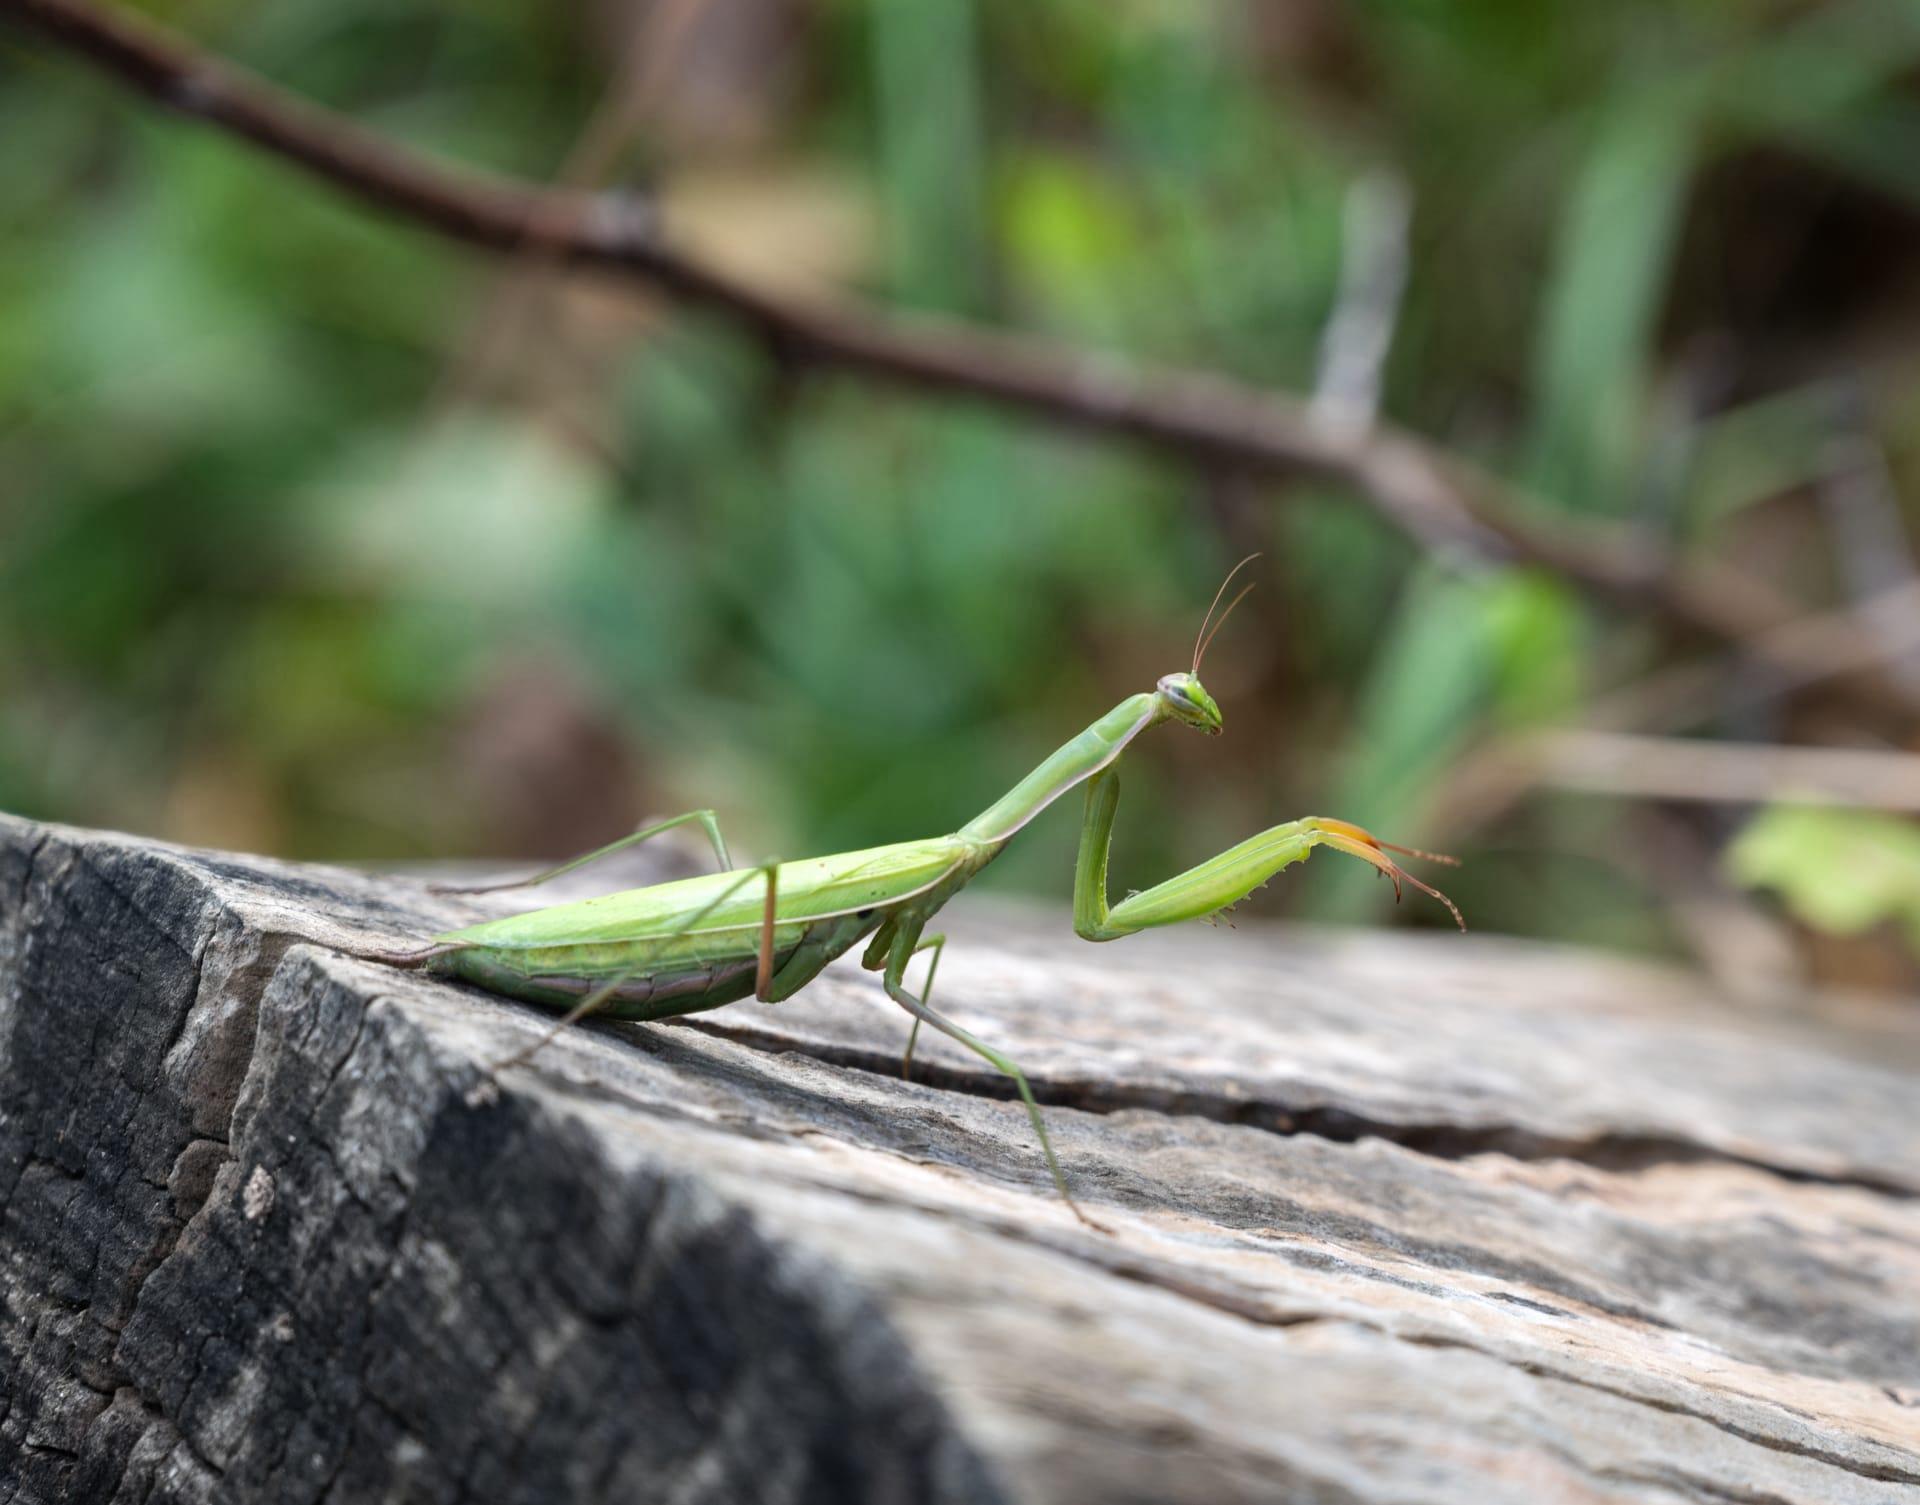 Mantid pictures